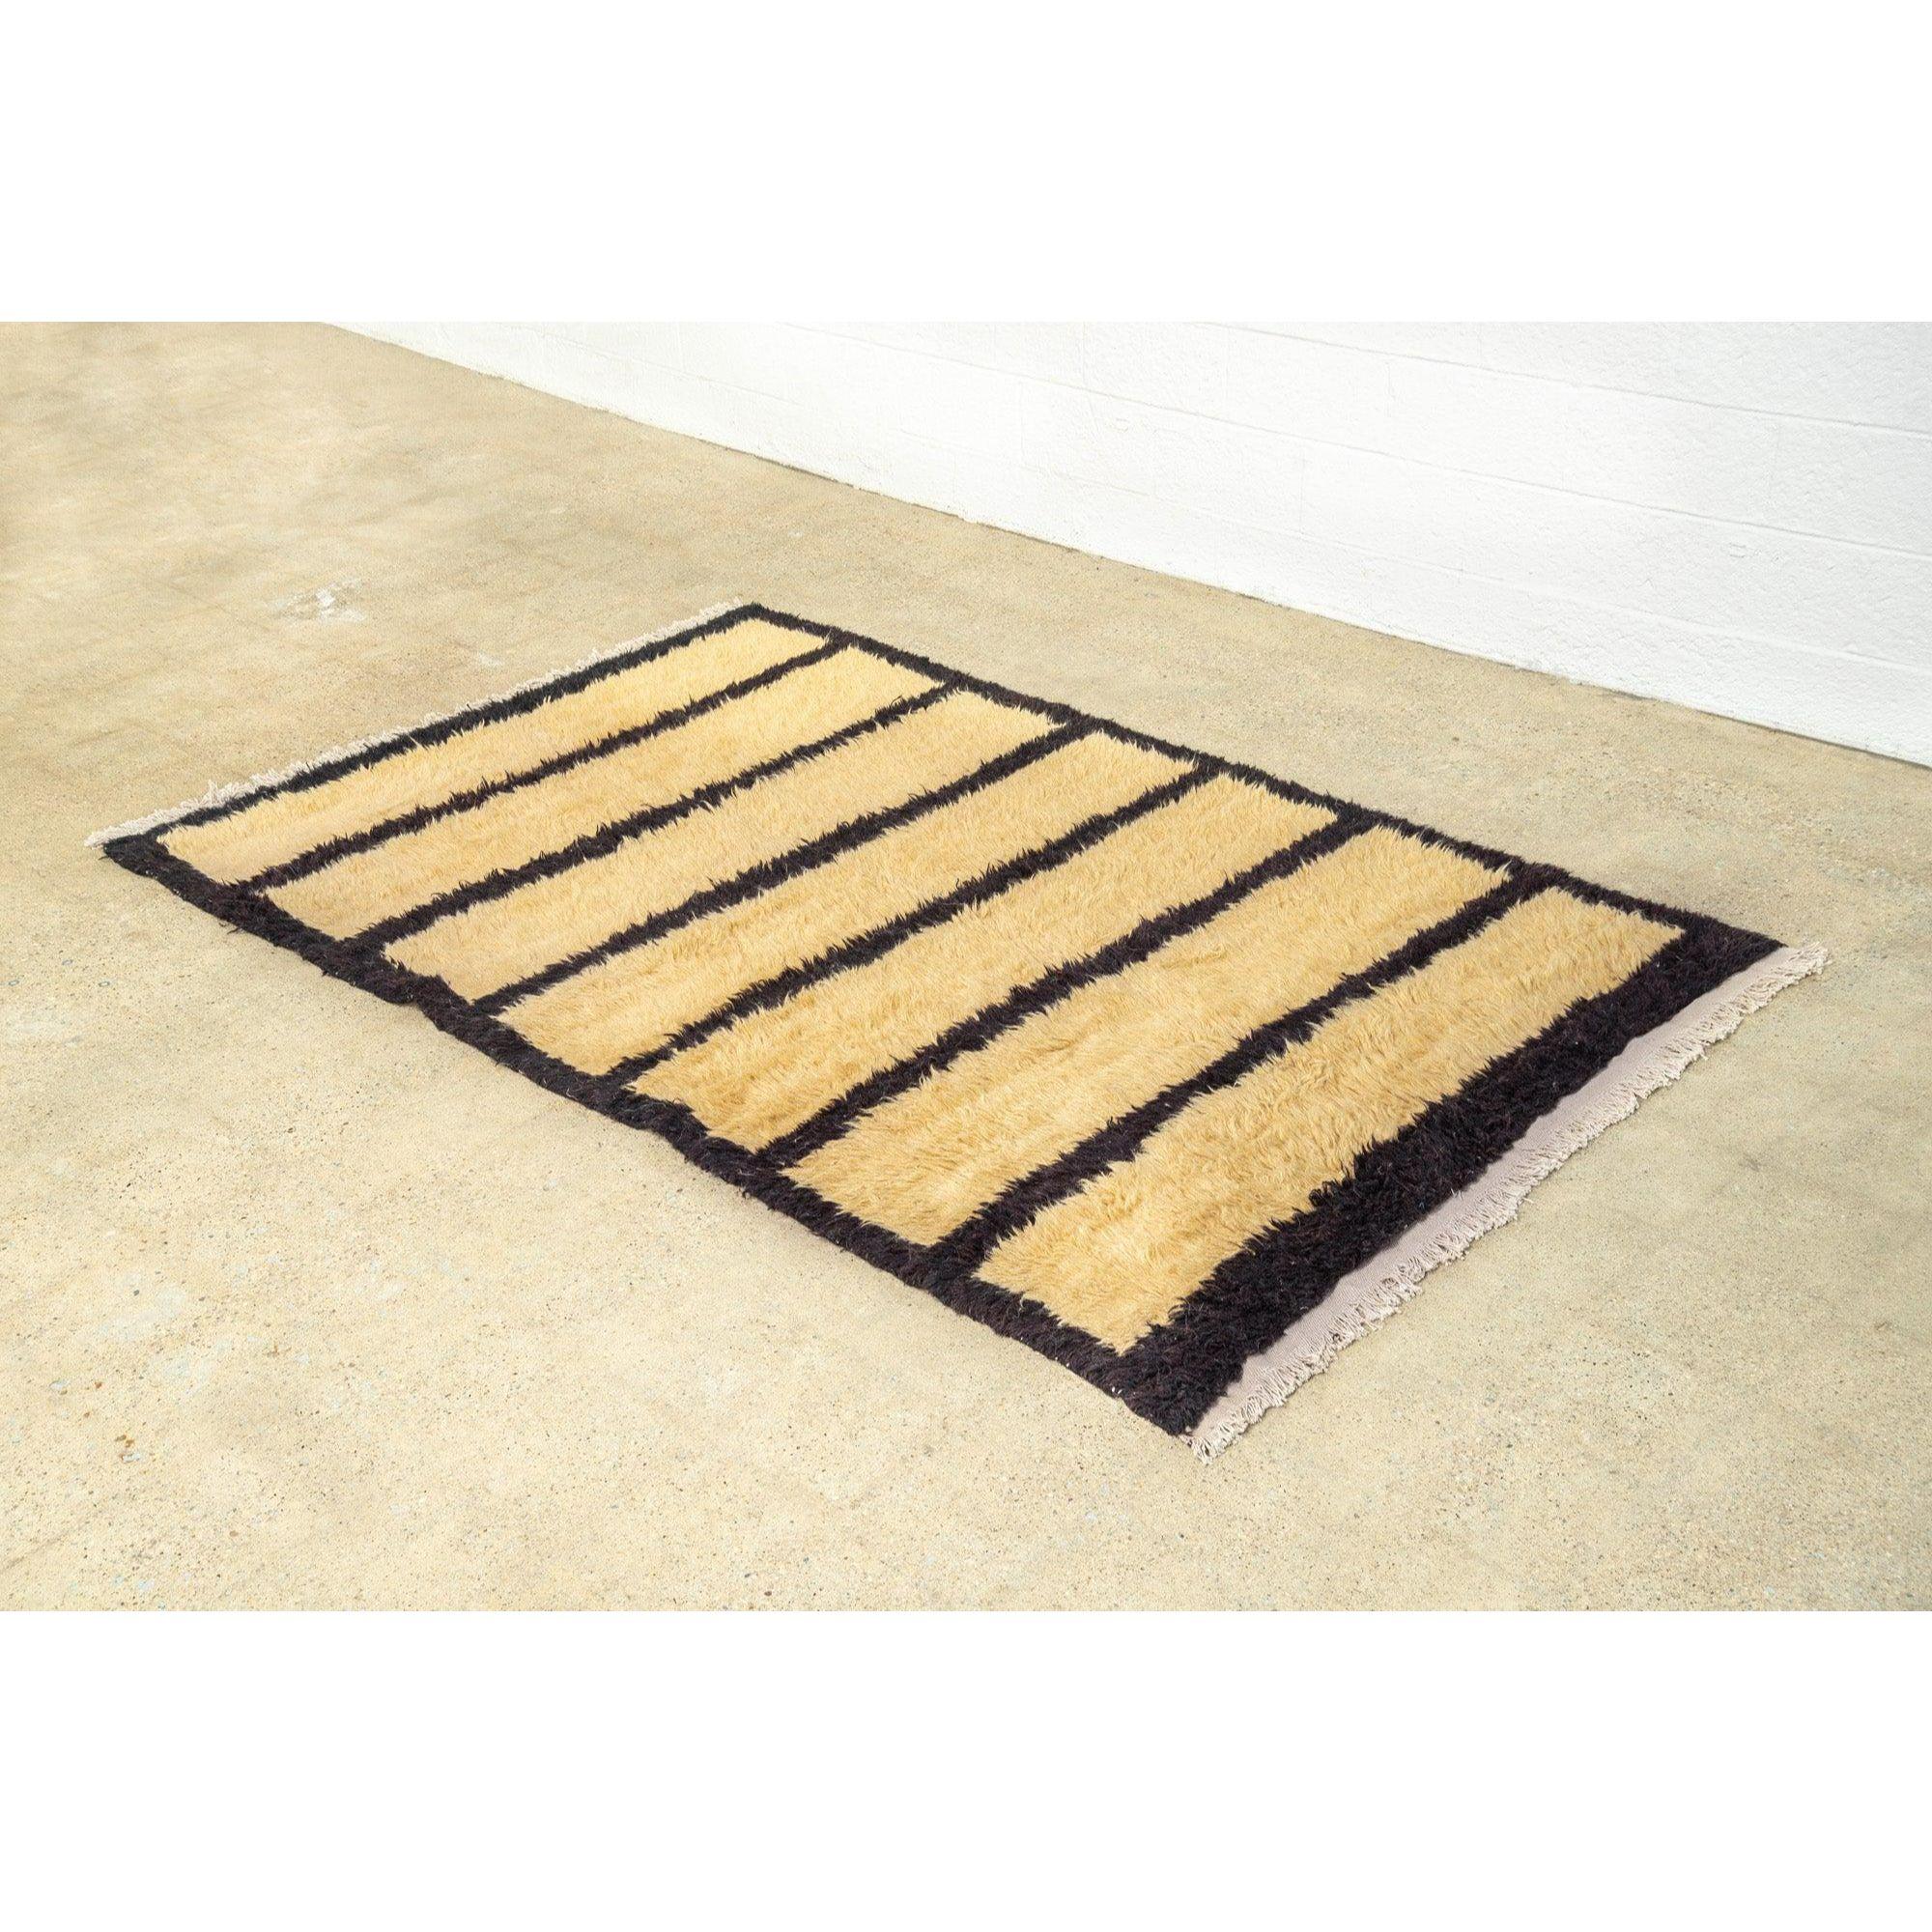 Hand-Woven Vintage Turkish Floor Rug in Beige and Black Striped Shaggy Wool For Sale